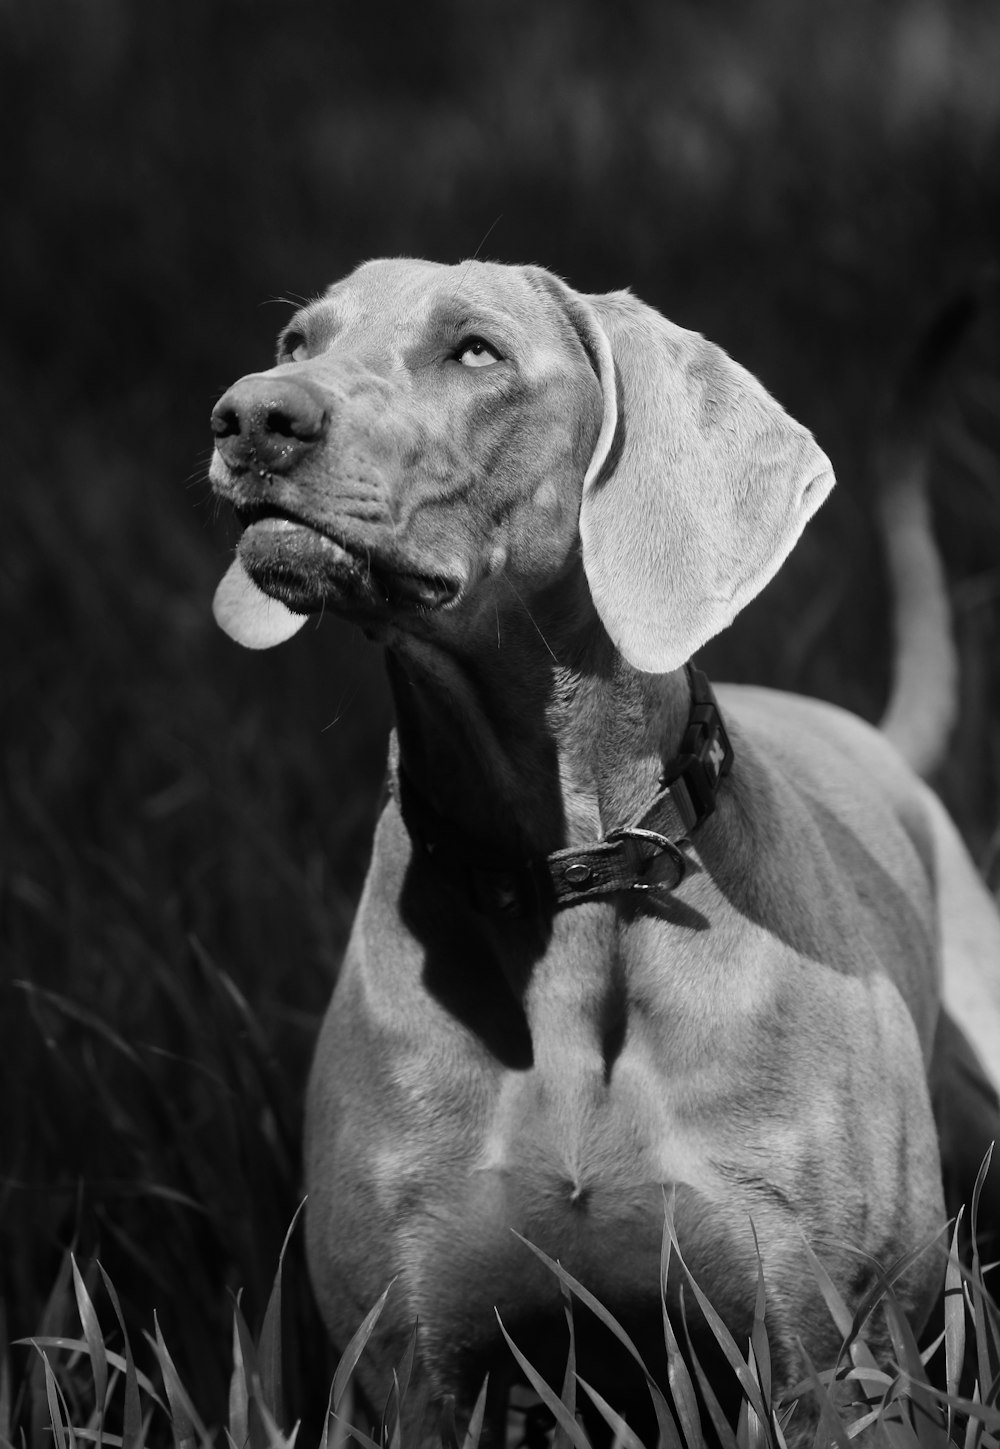 grayscale photography of dog standing on grass